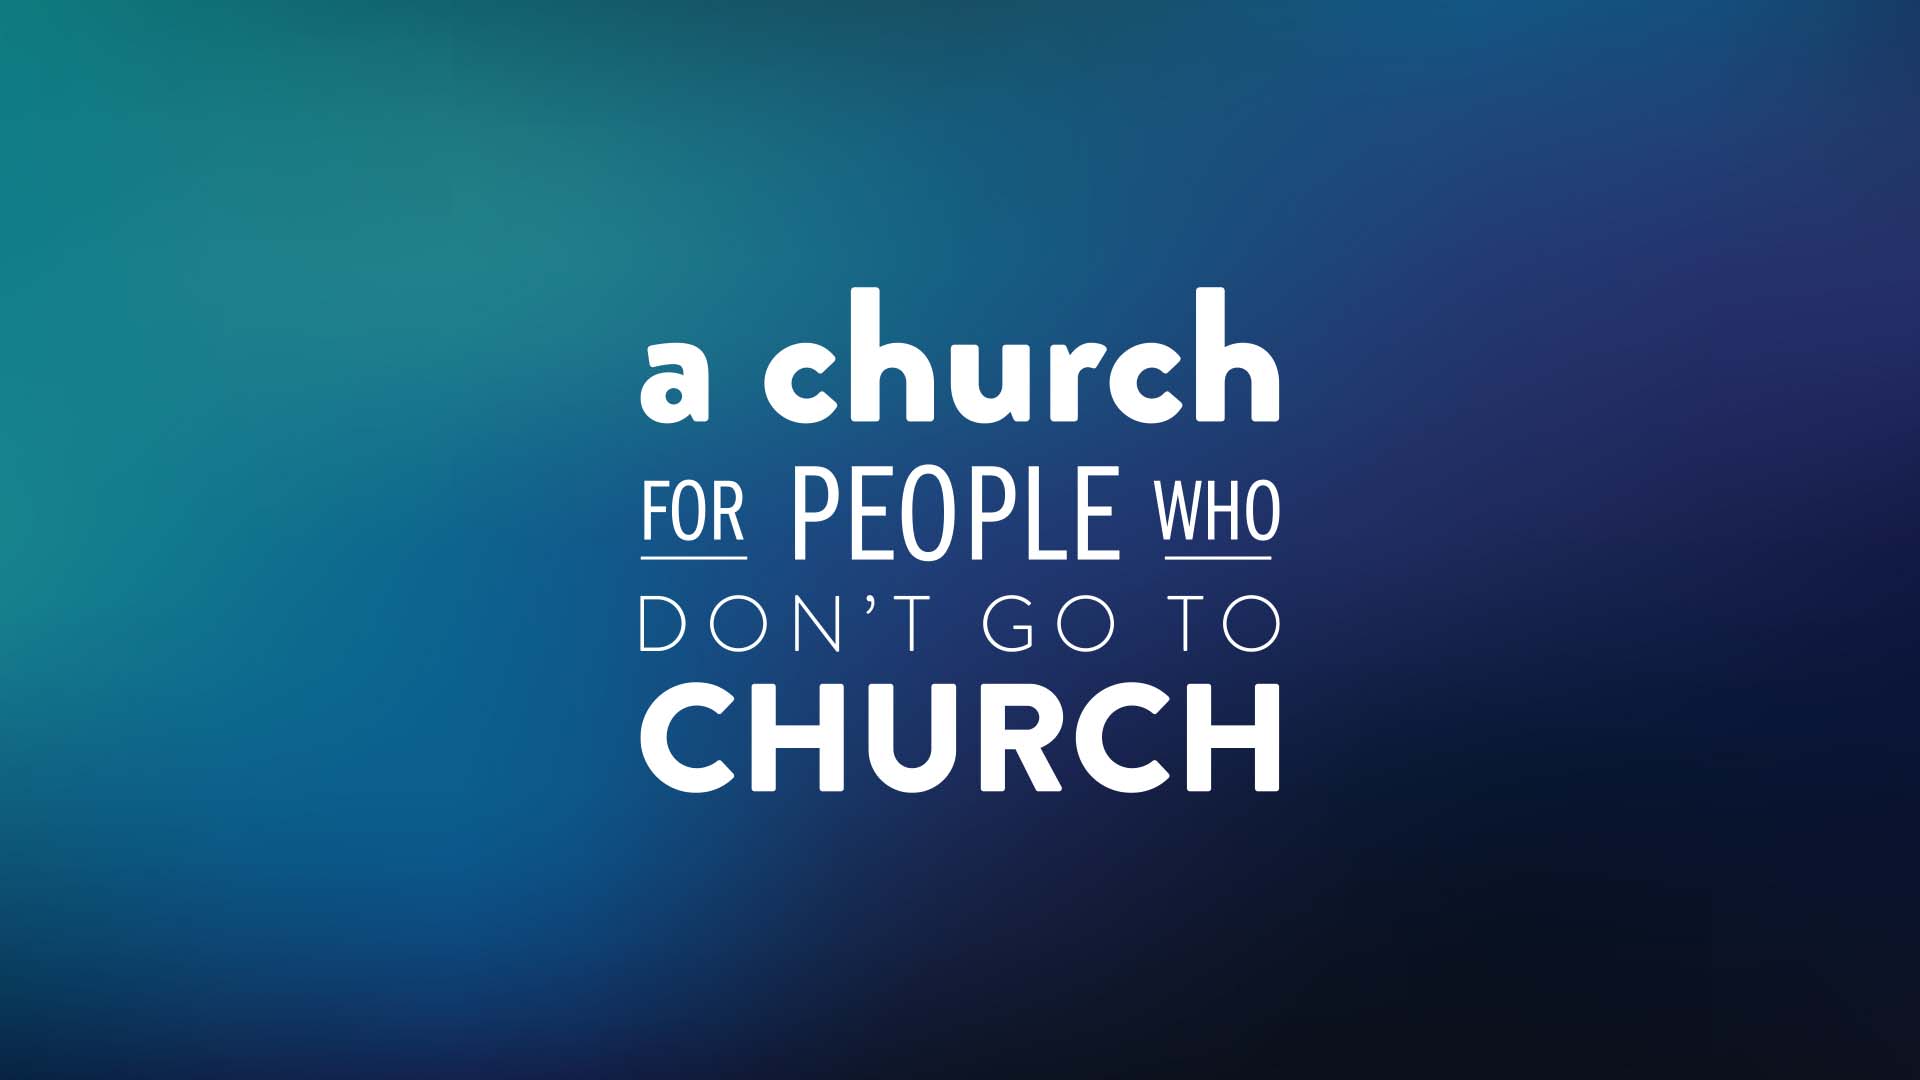 A church for people who don't go to church